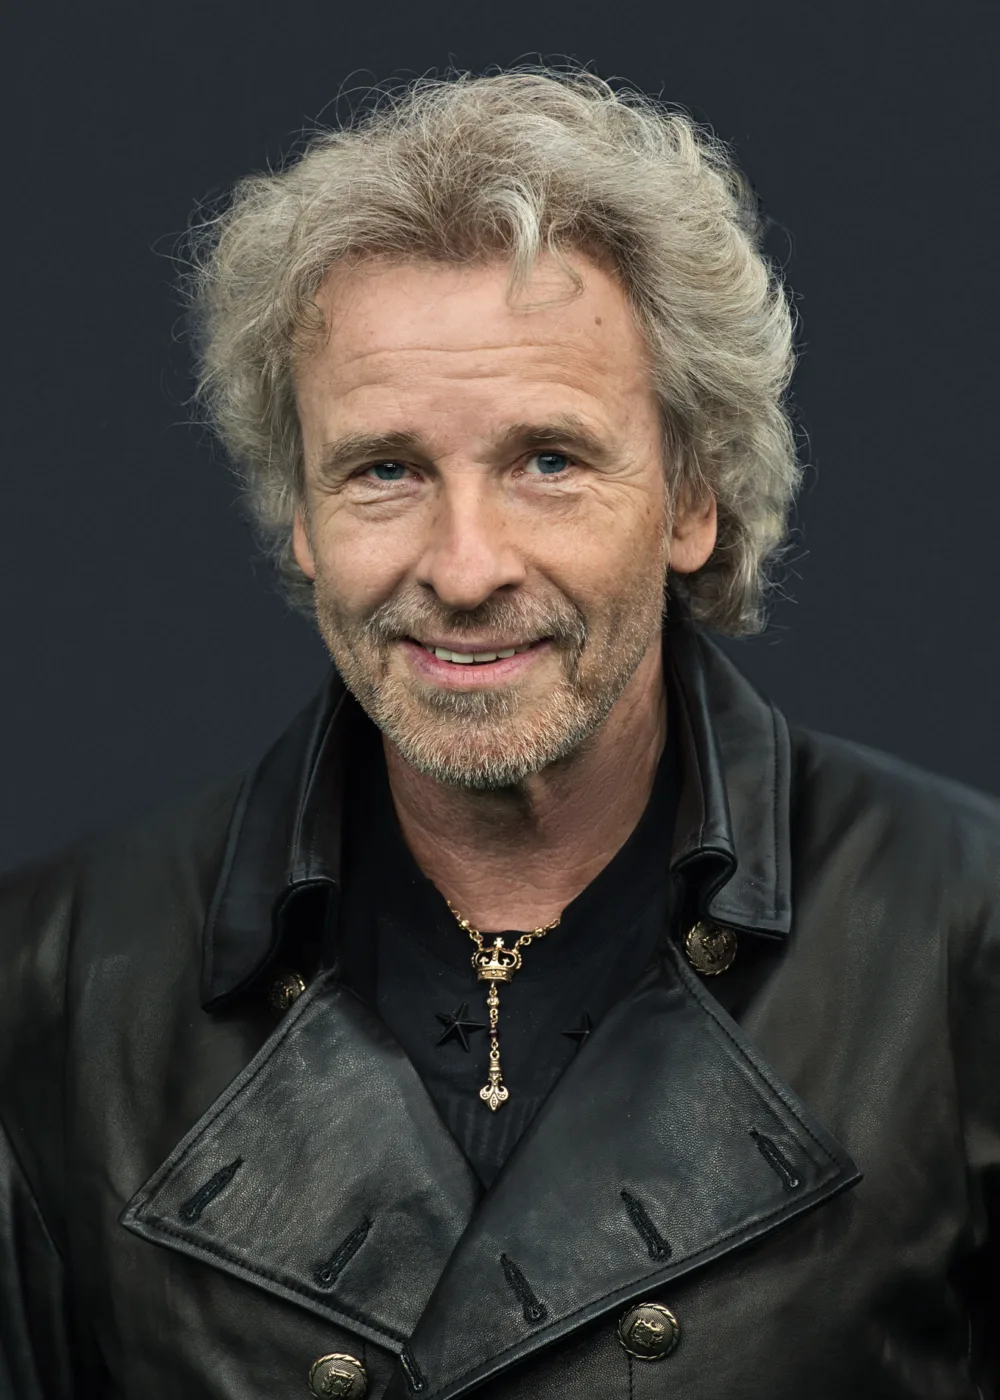 Thomas Gottschalk is a German entertainer, actor, and television host who has been a prominent figure in German media for several decades. He was born on May 18, 1950, in Bamberg, West Germany. Gottschalk began his career as a radio host in the 1970s, and he later transitioned to television. He is known for hosting several popular television shows in Germany, including 